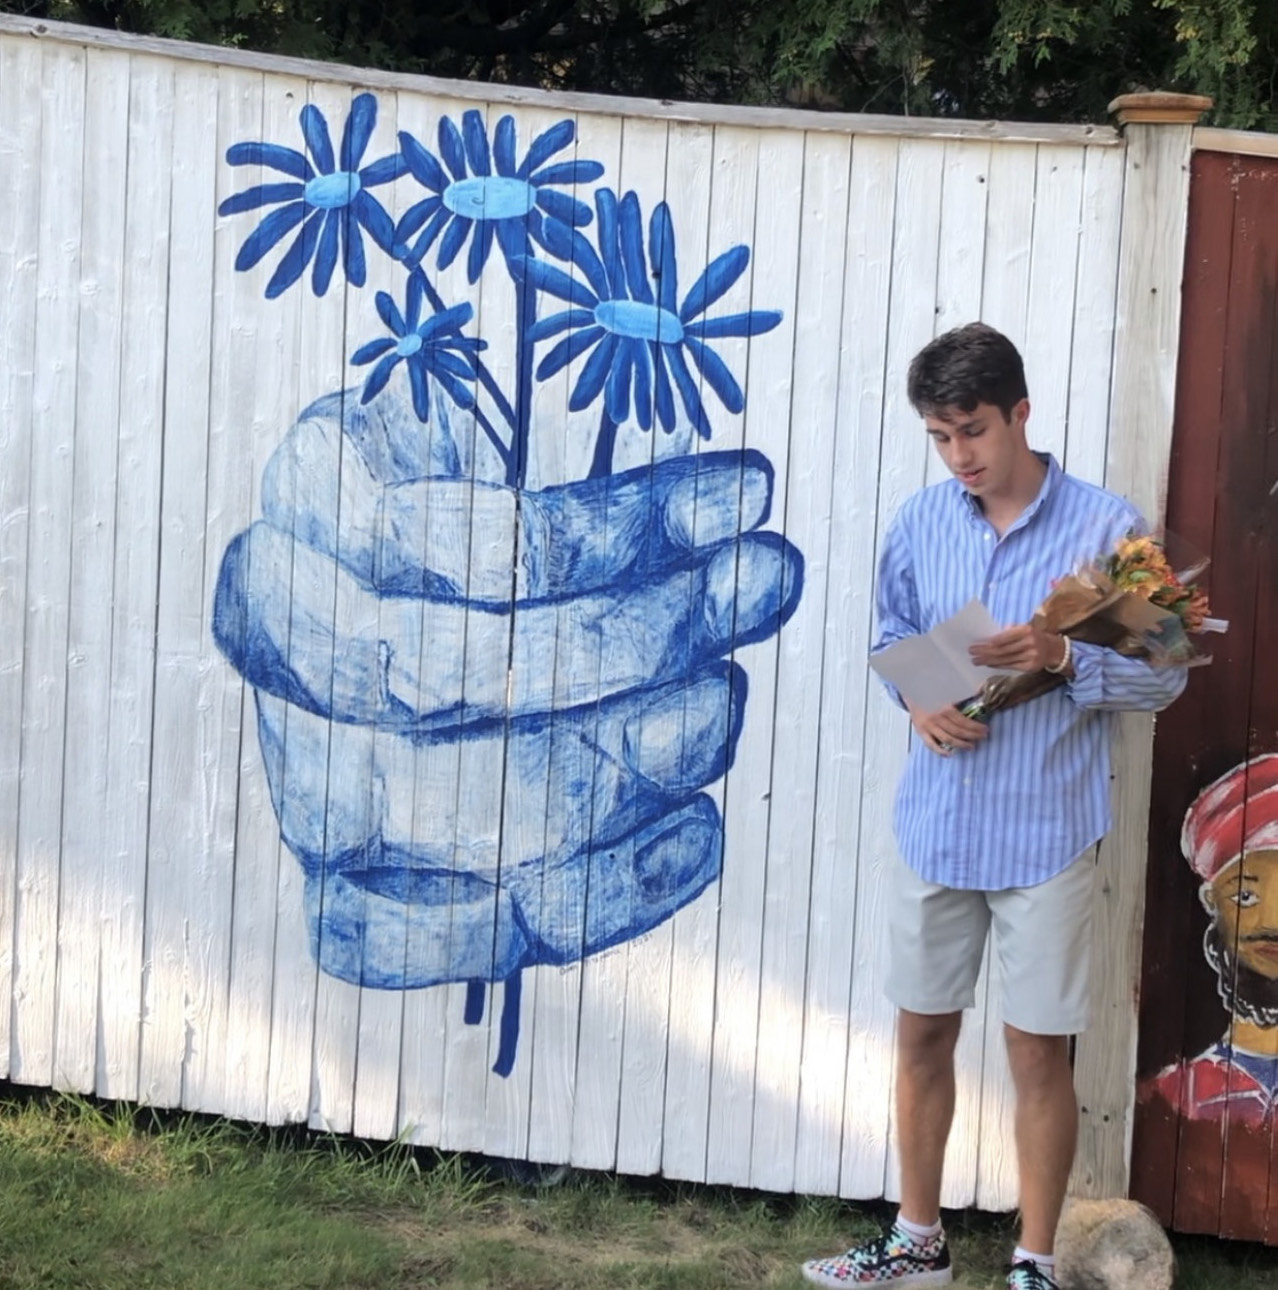 Independent Thoughts: EMC muralist seeks community support